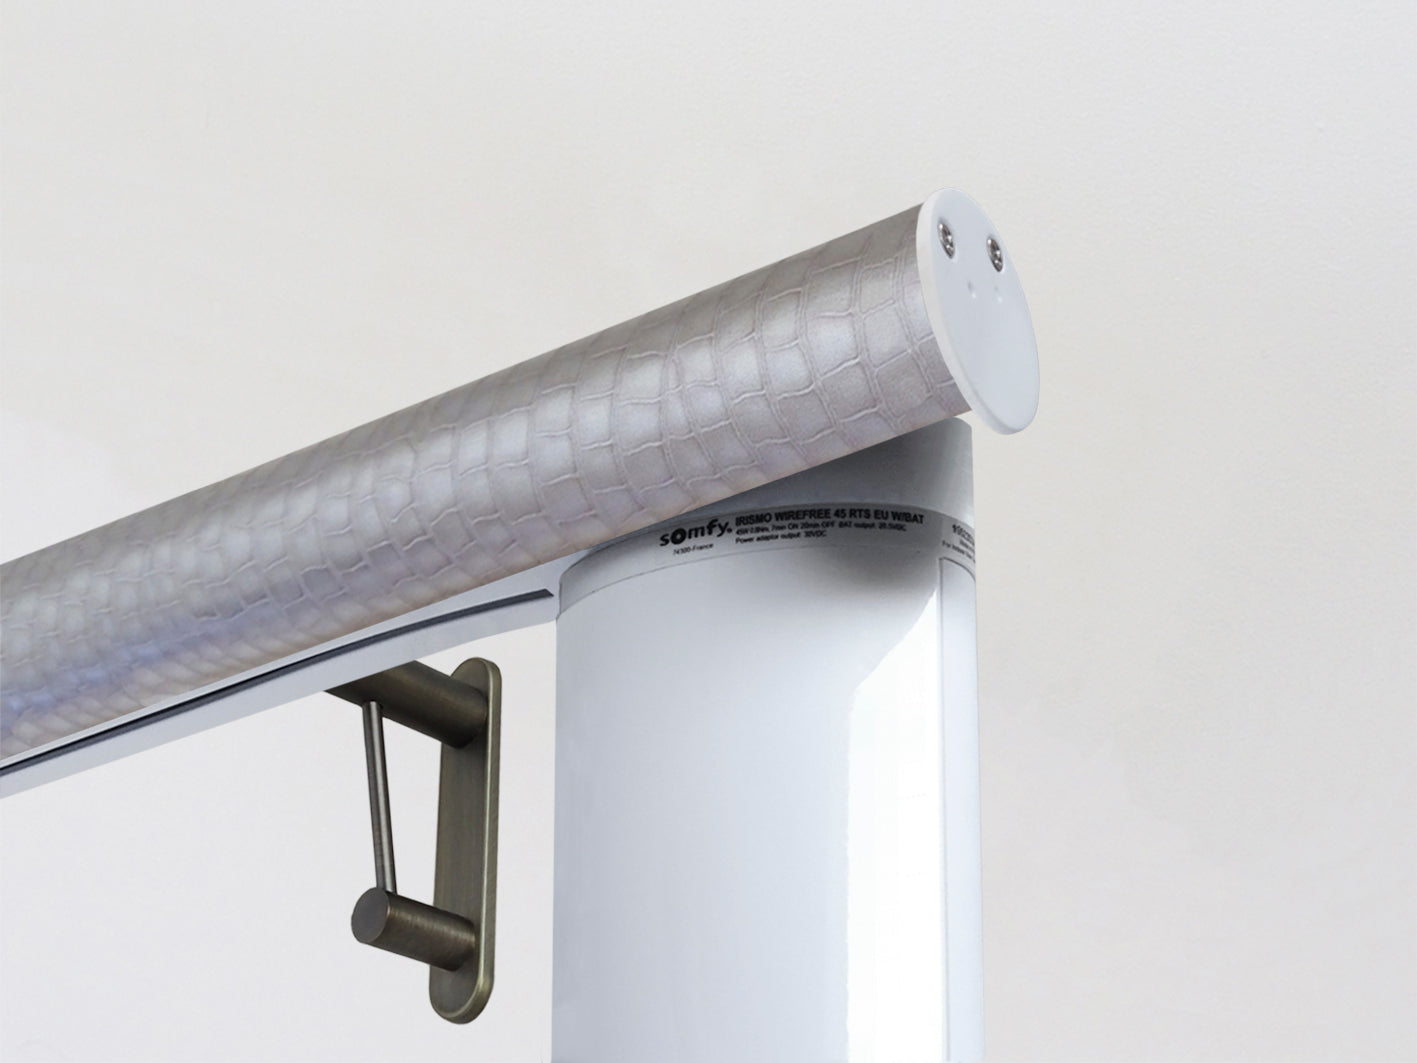 Motorised electric curtain pole in sliver rose pewter, wireless & battery powered using the Somfy Glydea track | Walcot House UK curtain pole specialists